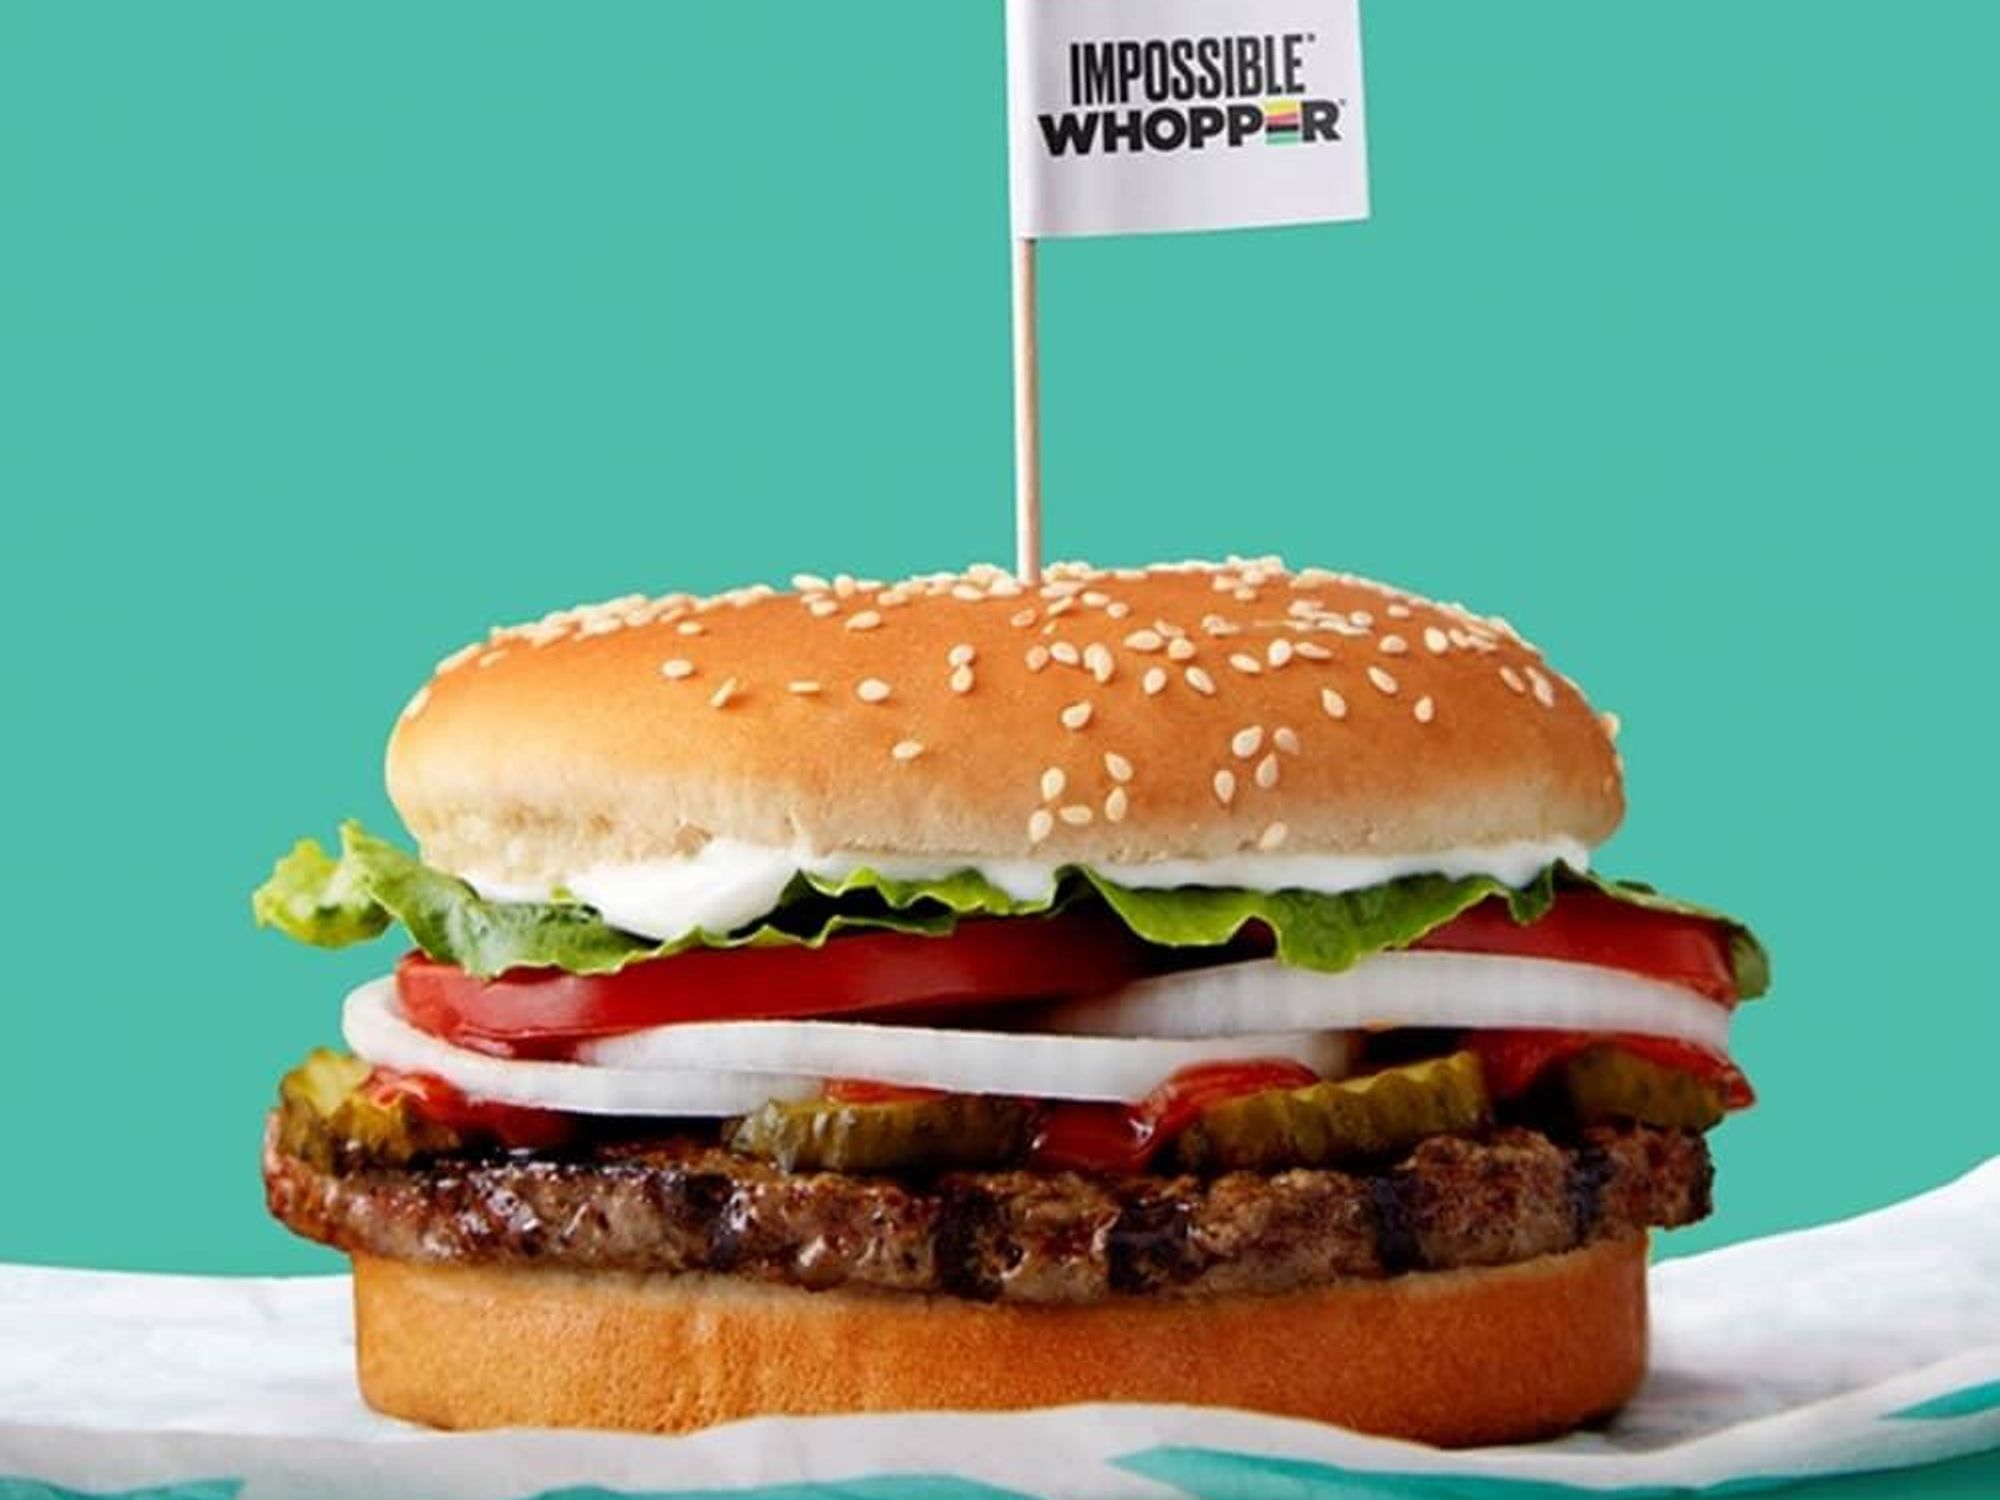 Impossible Whopper Burger King